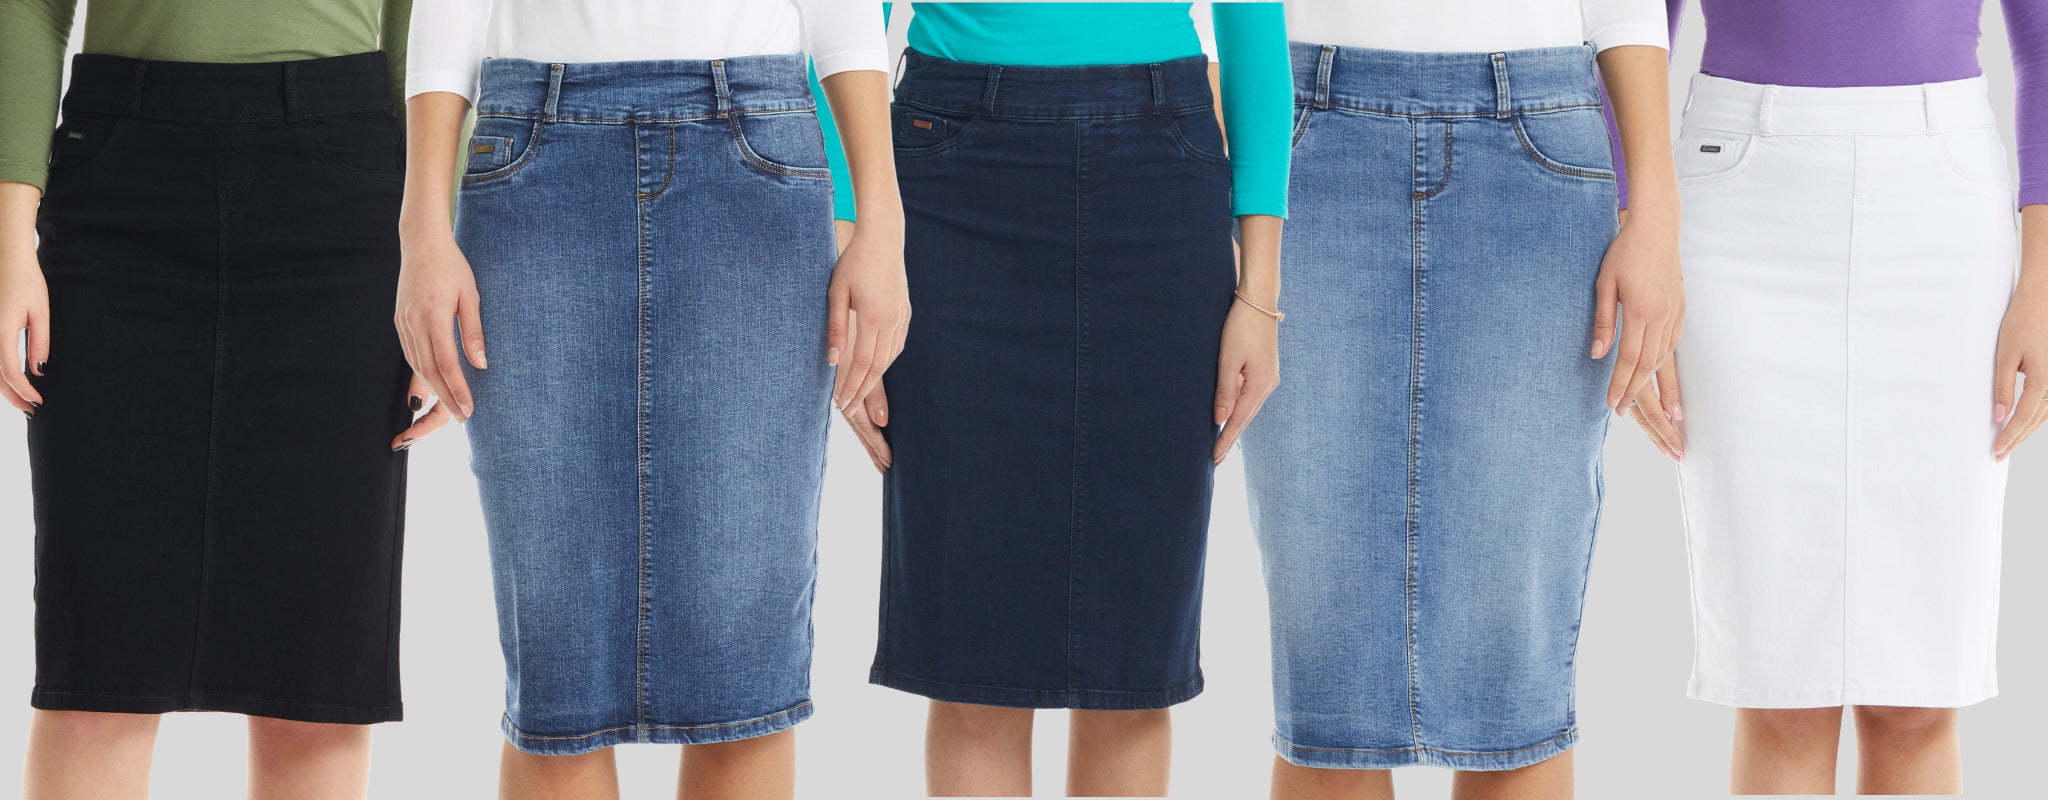 Below the knee straight jean skirt without pockets